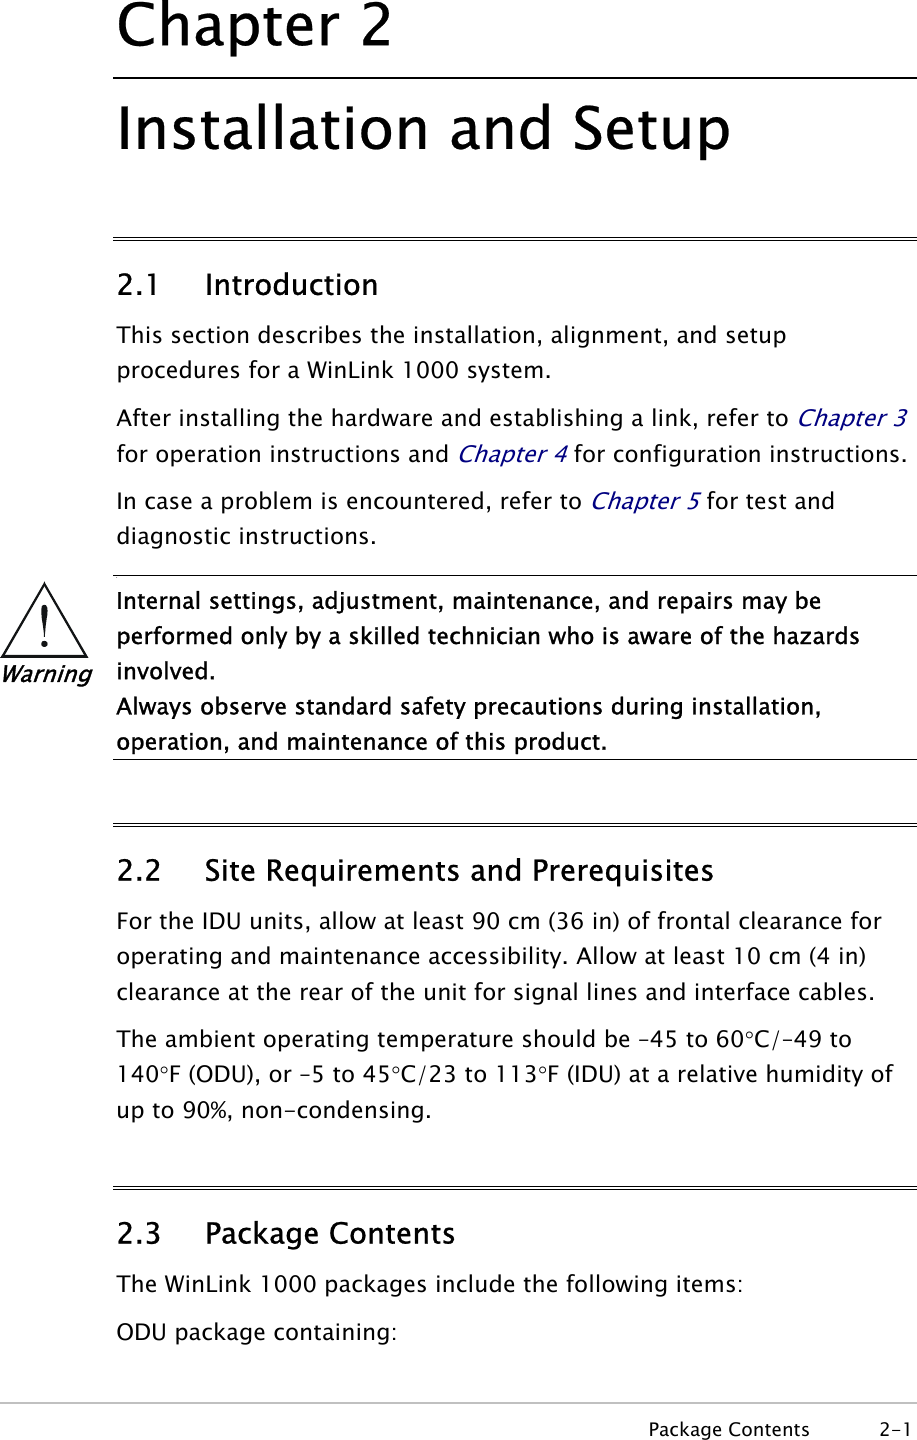 Chapter  2 Installation and Setup 2.1 Introduction This section describes the installation, alignment, and setup procedures for a WinLink 1000 system.  After installing the hardware and establishing a link, refer to Chapter 3 for operation instructions and Chapter 4 for configuration instructions. In case a problem is encountered, refer to Chapter 5 for test and diagnostic instructions. •  Warning Internal settings, adjustment, maintenance, and repairs may be performed only by a skilled technician who is aware of the hazards involved. Always observe standard safety precautions during installation, operation, and maintenance of this product.  2.2 Site Requirements and Prerequisites For the IDU units, allow at least 90 cm (36 in) of frontal clearance for operating and maintenance accessibility. Allow at least 10 cm (4 in) clearance at the rear of the unit for signal lines and interface cables.  The ambient operating temperature should be –45 to 60°C/–49 to 140°F (ODU), or –5 to 45°C/23 to 113°F (IDU) at a relative humidity of up to 90%, non-condensing.  2.3 Package Contents The WinLink 1000 packages include the following items: ODU package containing:  Package Contents  2-1 